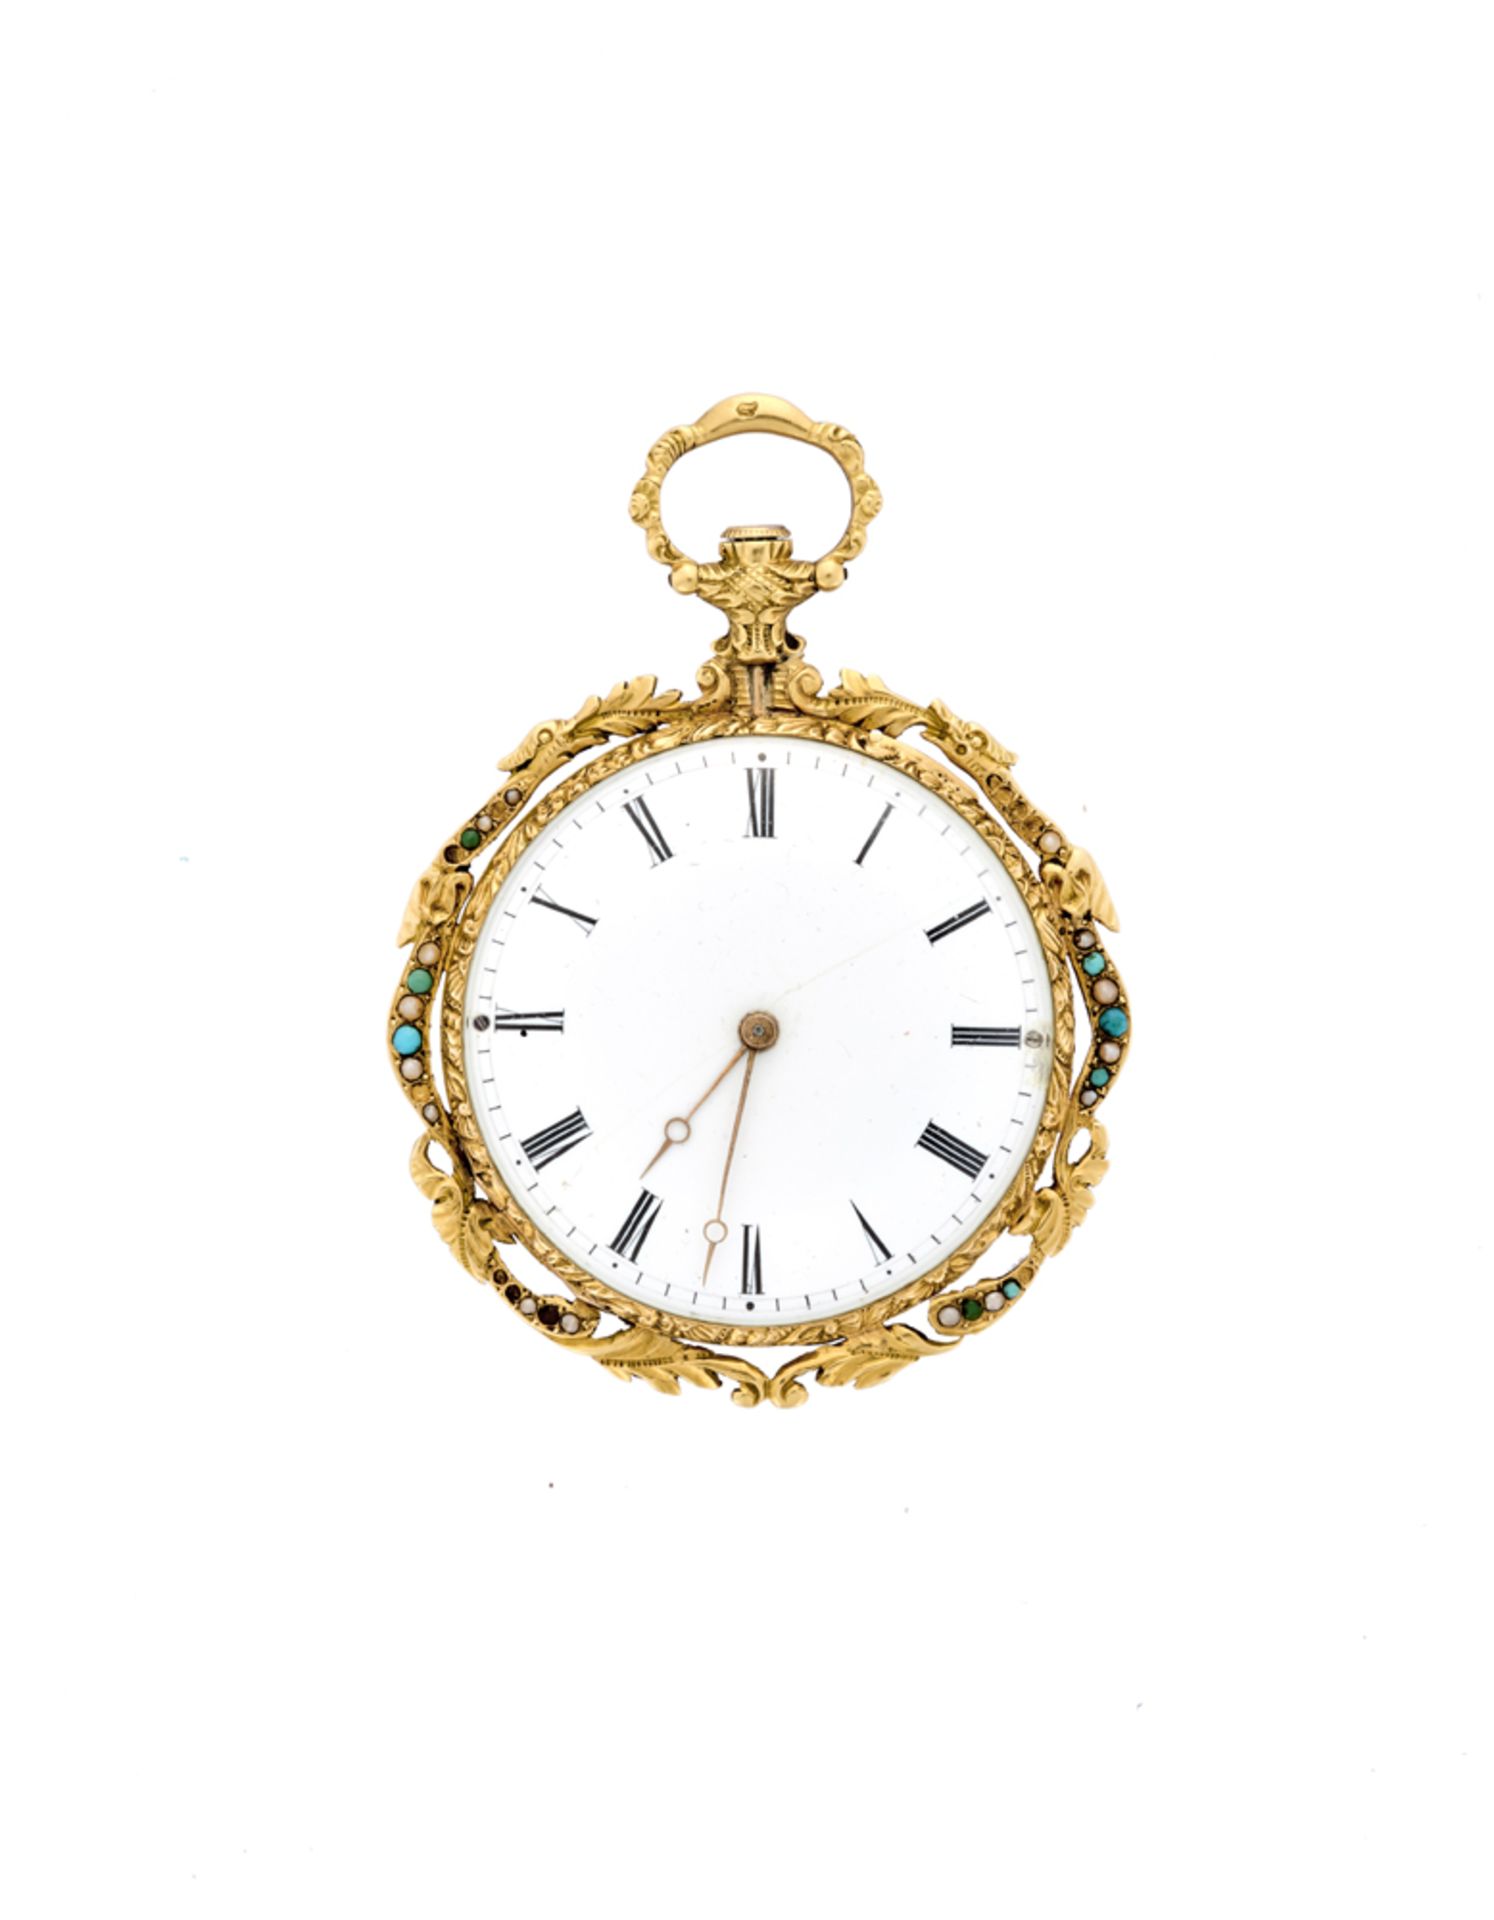 ALLEGRONE & EMERYLady's 18K gold pocket watch with small turquoise19th centuryCase signedKey-wind